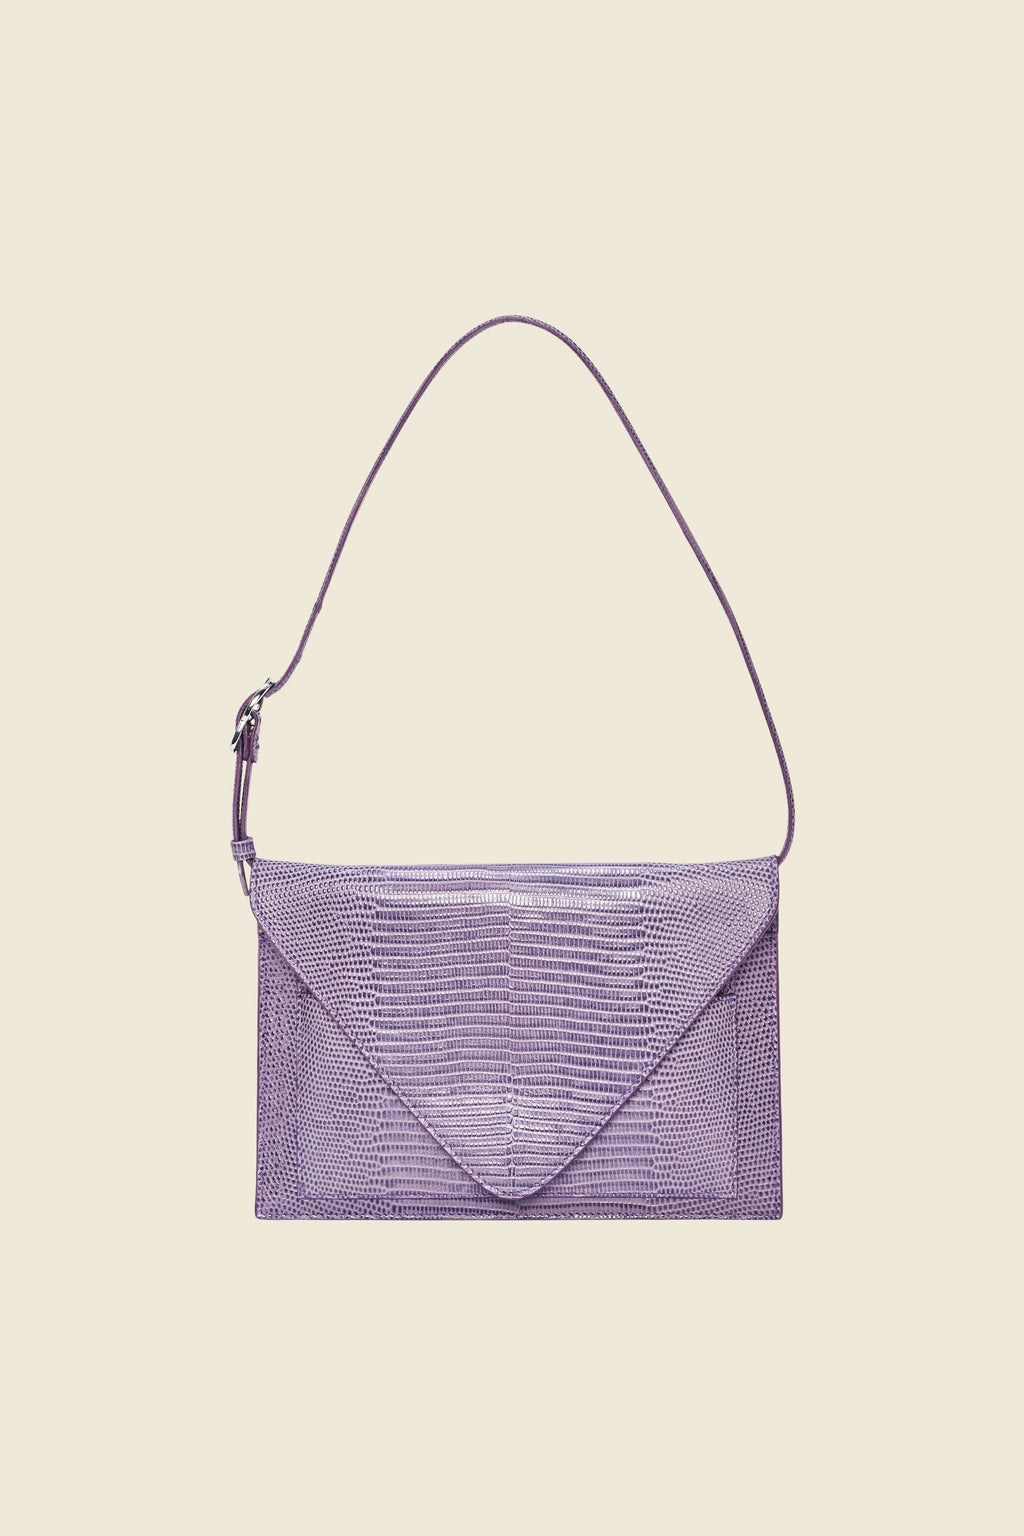 Dorothee Schumacher-OUTLET-SALE-TEXTURED LUXE glasses envelope-OS-wild orchid lilac-ARCHIVIST